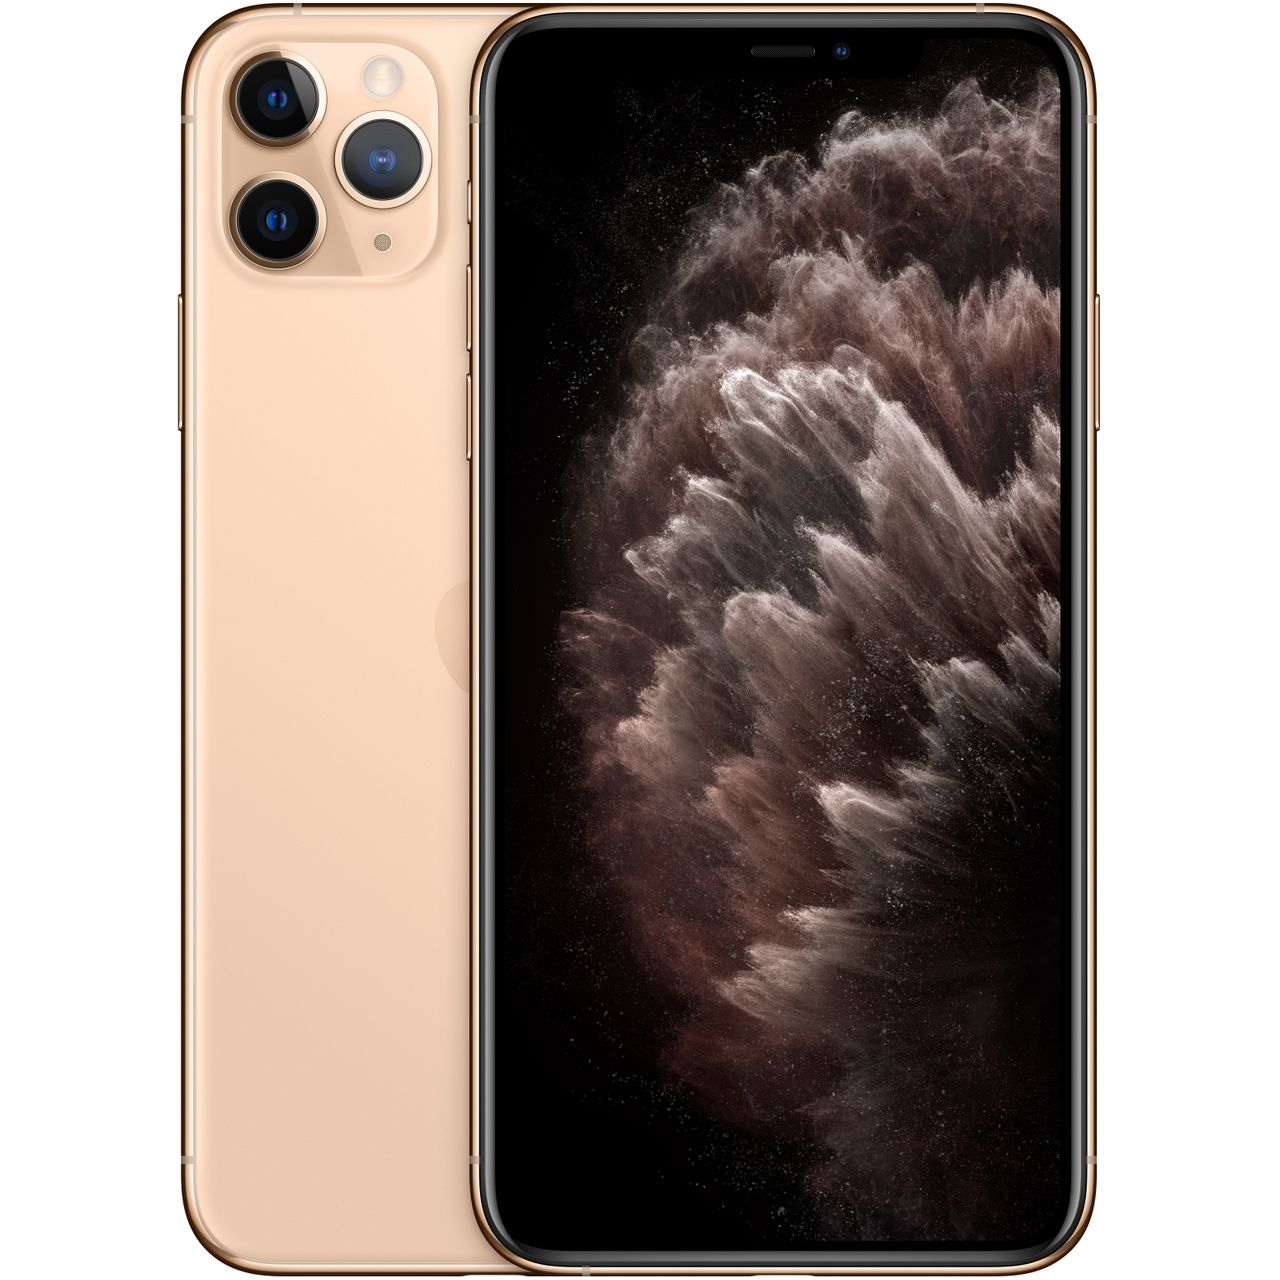 Apple iPhone 11 Pro Max 512GB in Gold Review